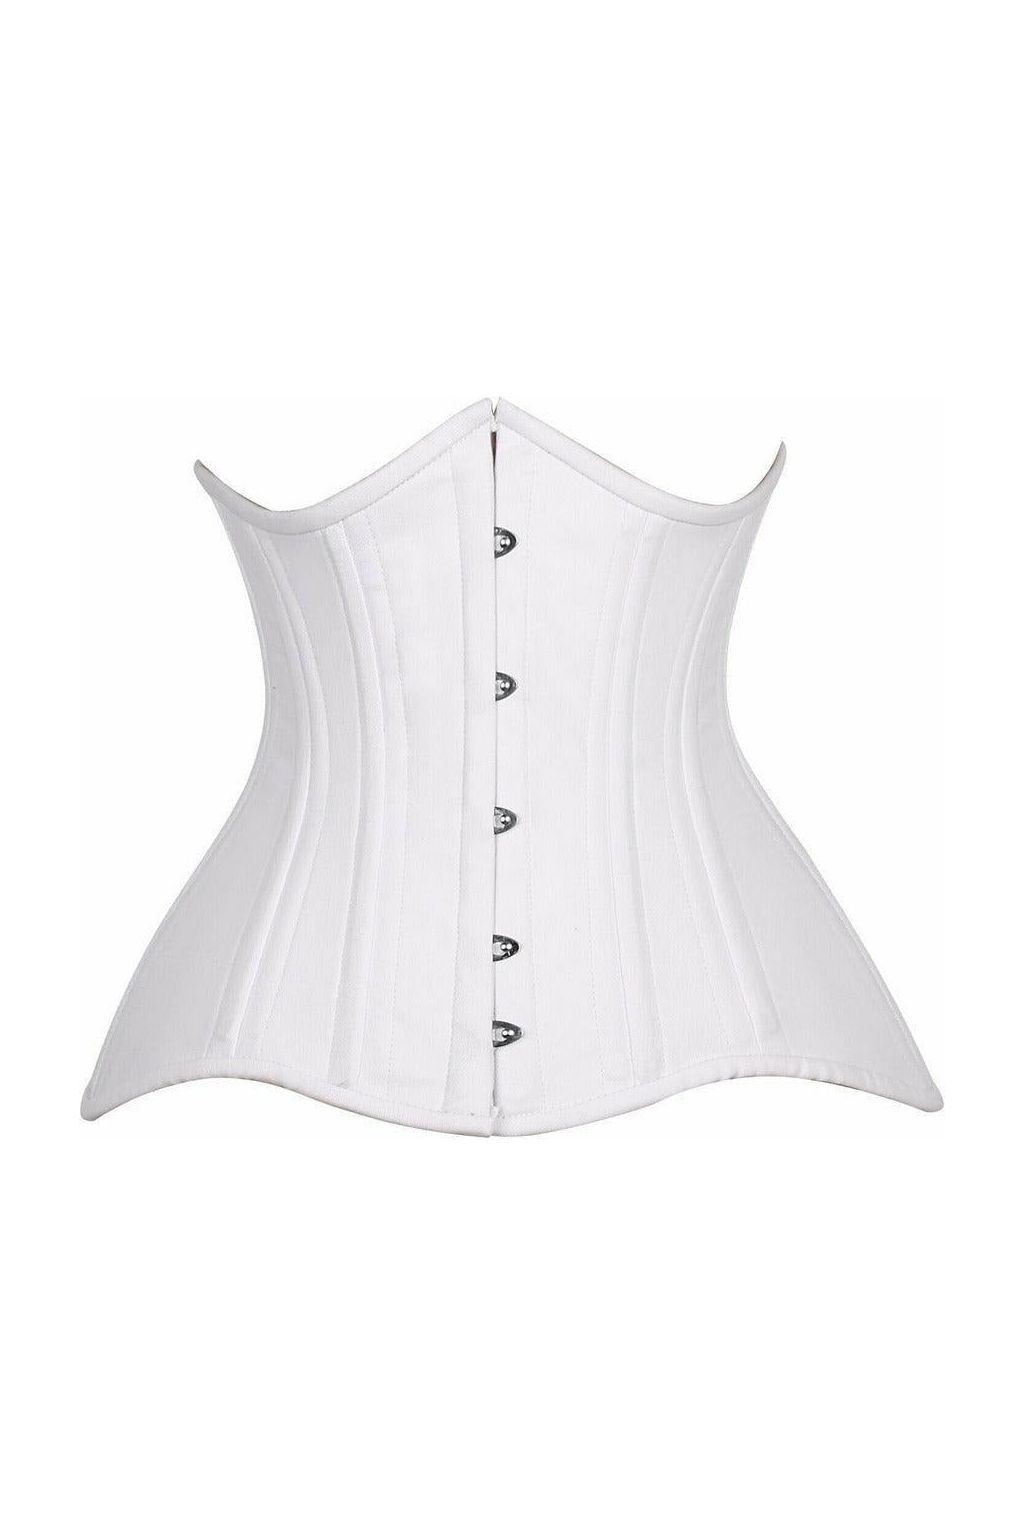 Daisy Corsets Top Drawer CURVY White Cotton Double Steel Boned